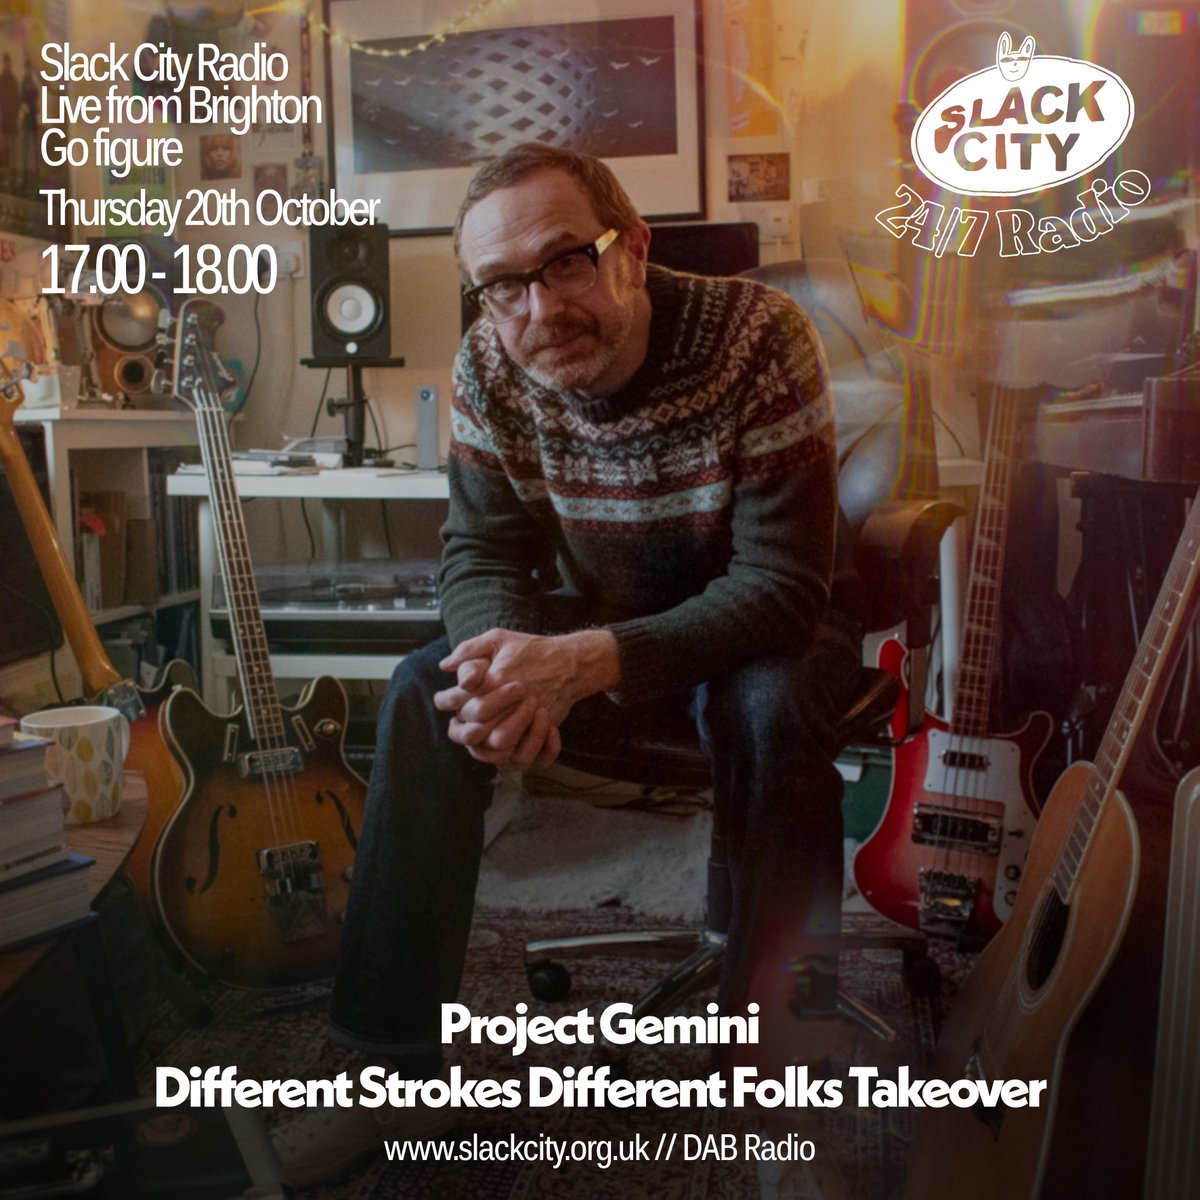 ON AIR. Ahead of his show at @thehopeandruin with @shindigmagazine this coming Monday, Project Gemini (on Mr. Bongo) takes over the @DiffFolks show with a very special guest mix. Tune in now. SLACKCITY.ORG.UK // DAB RADIO // LINK IN BIO.